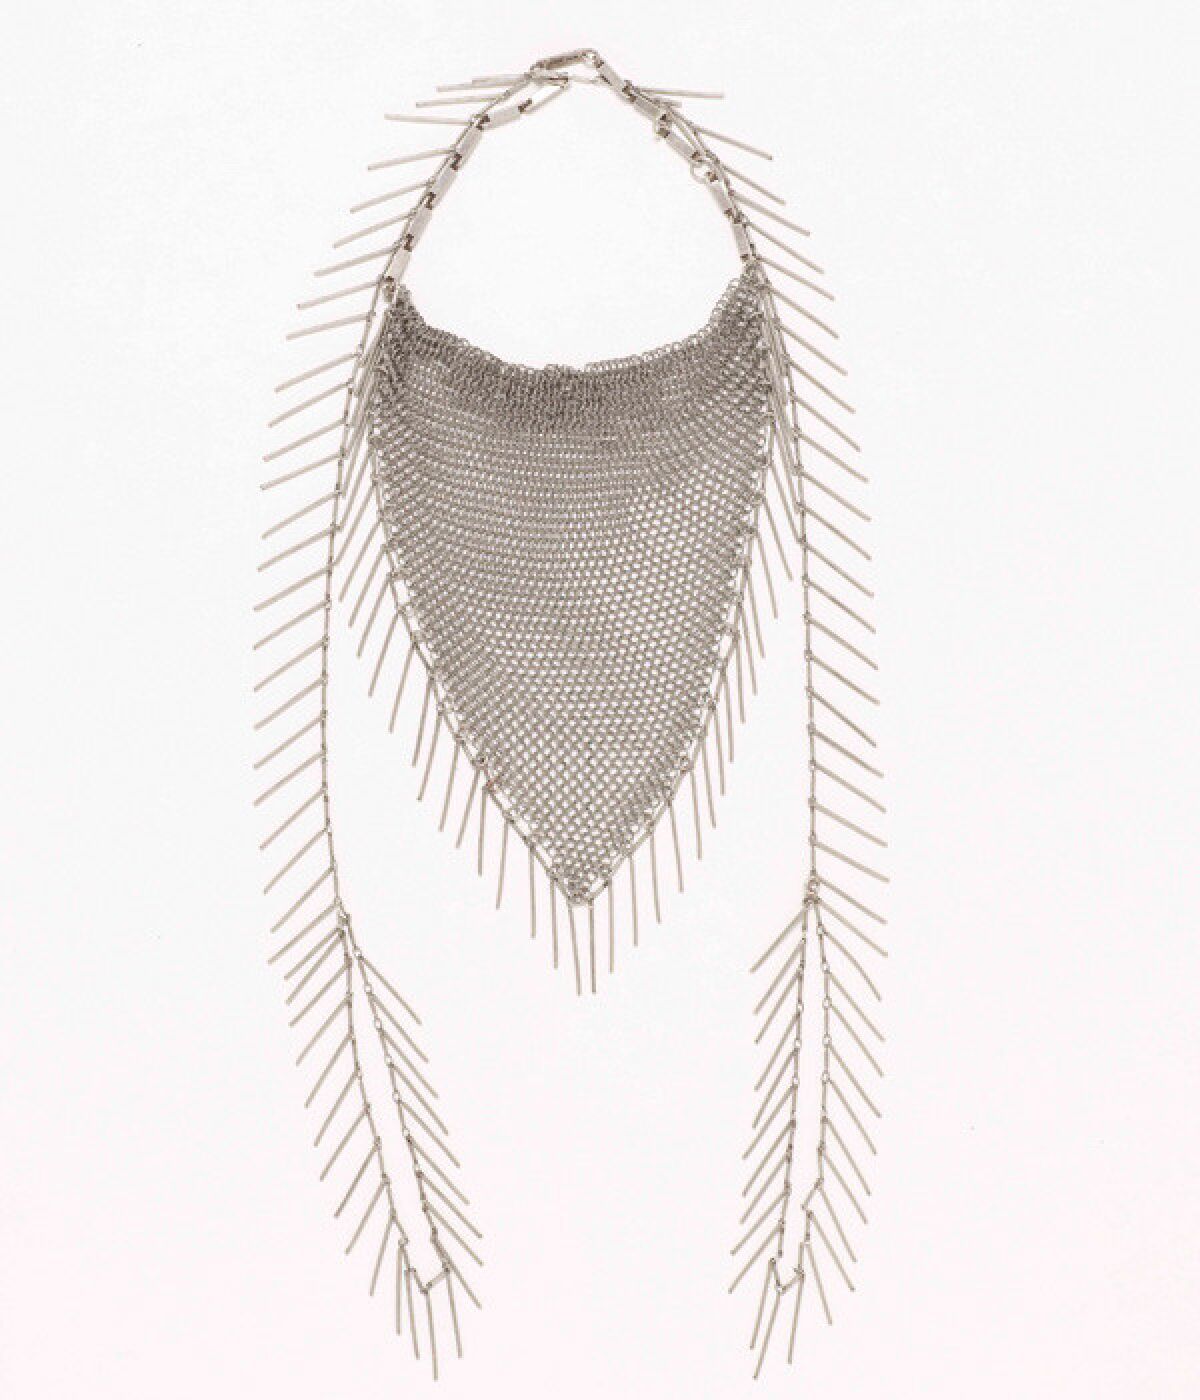 Isabel Marant silver chainmail necklace.